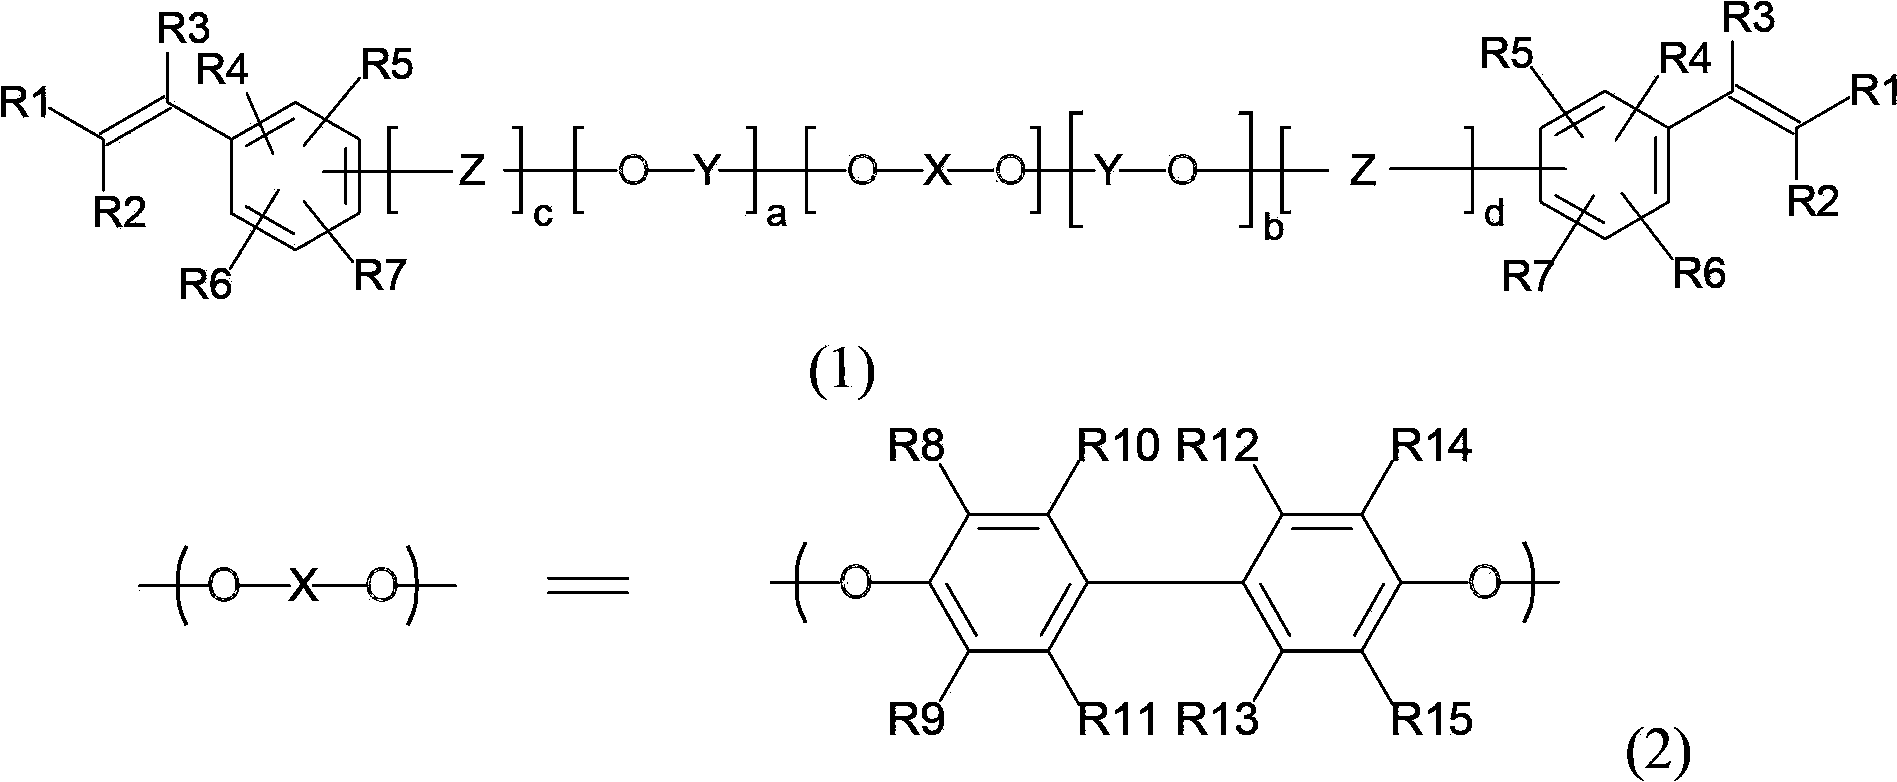 Low dielectric resin composite and copper foil base plate applying composite as well as printed circuit board